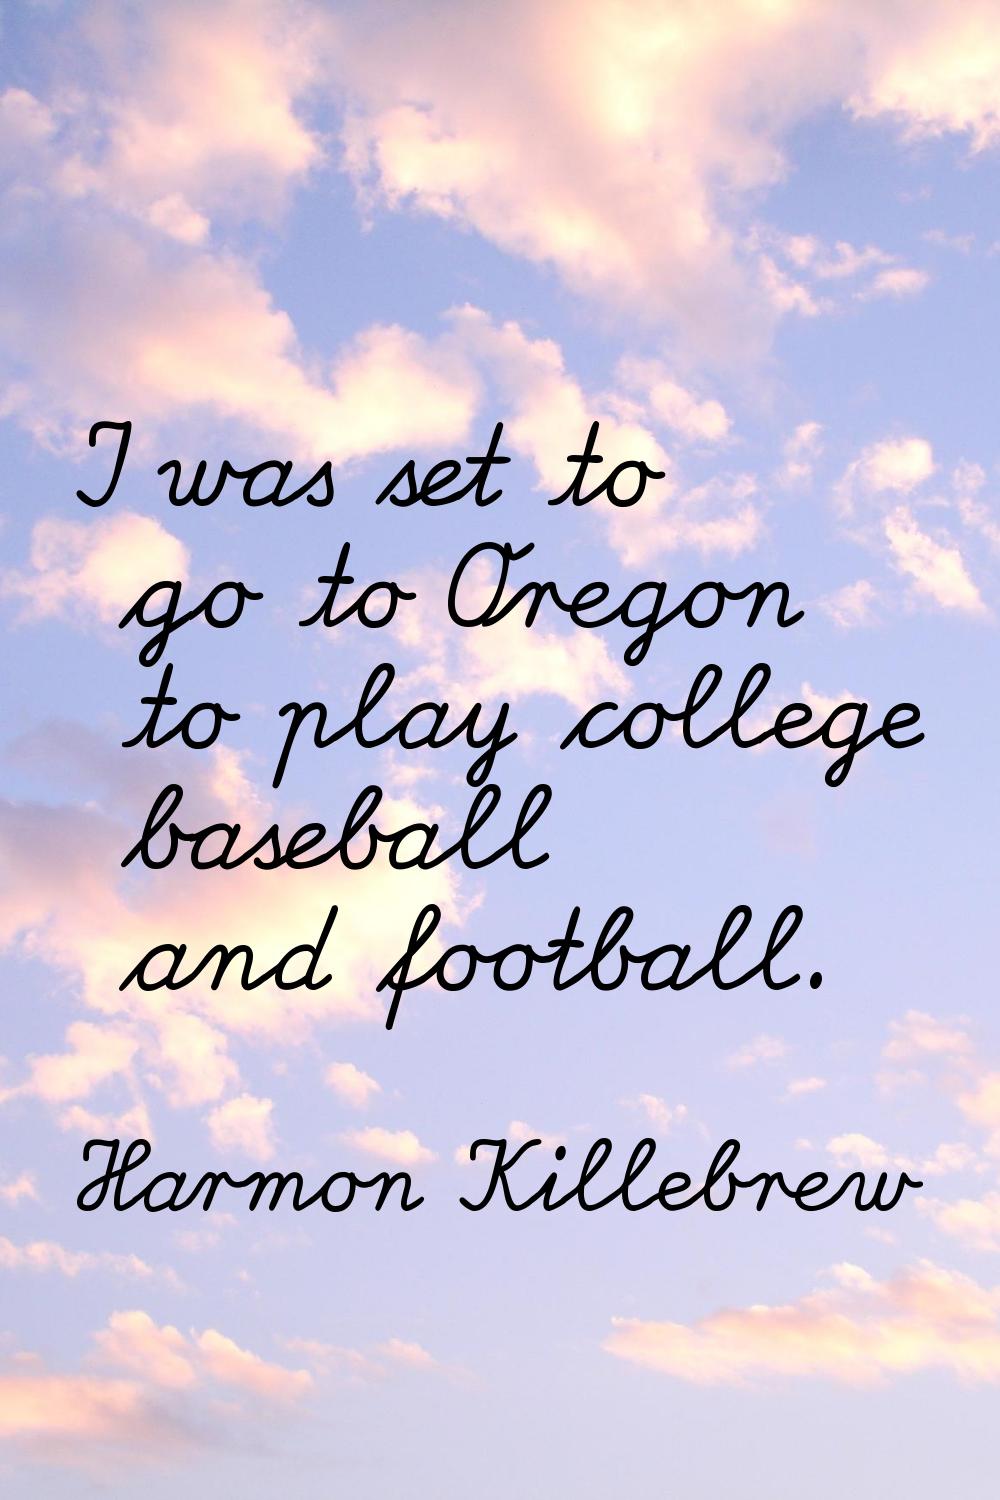 I was set to go to Oregon to play college baseball and football.